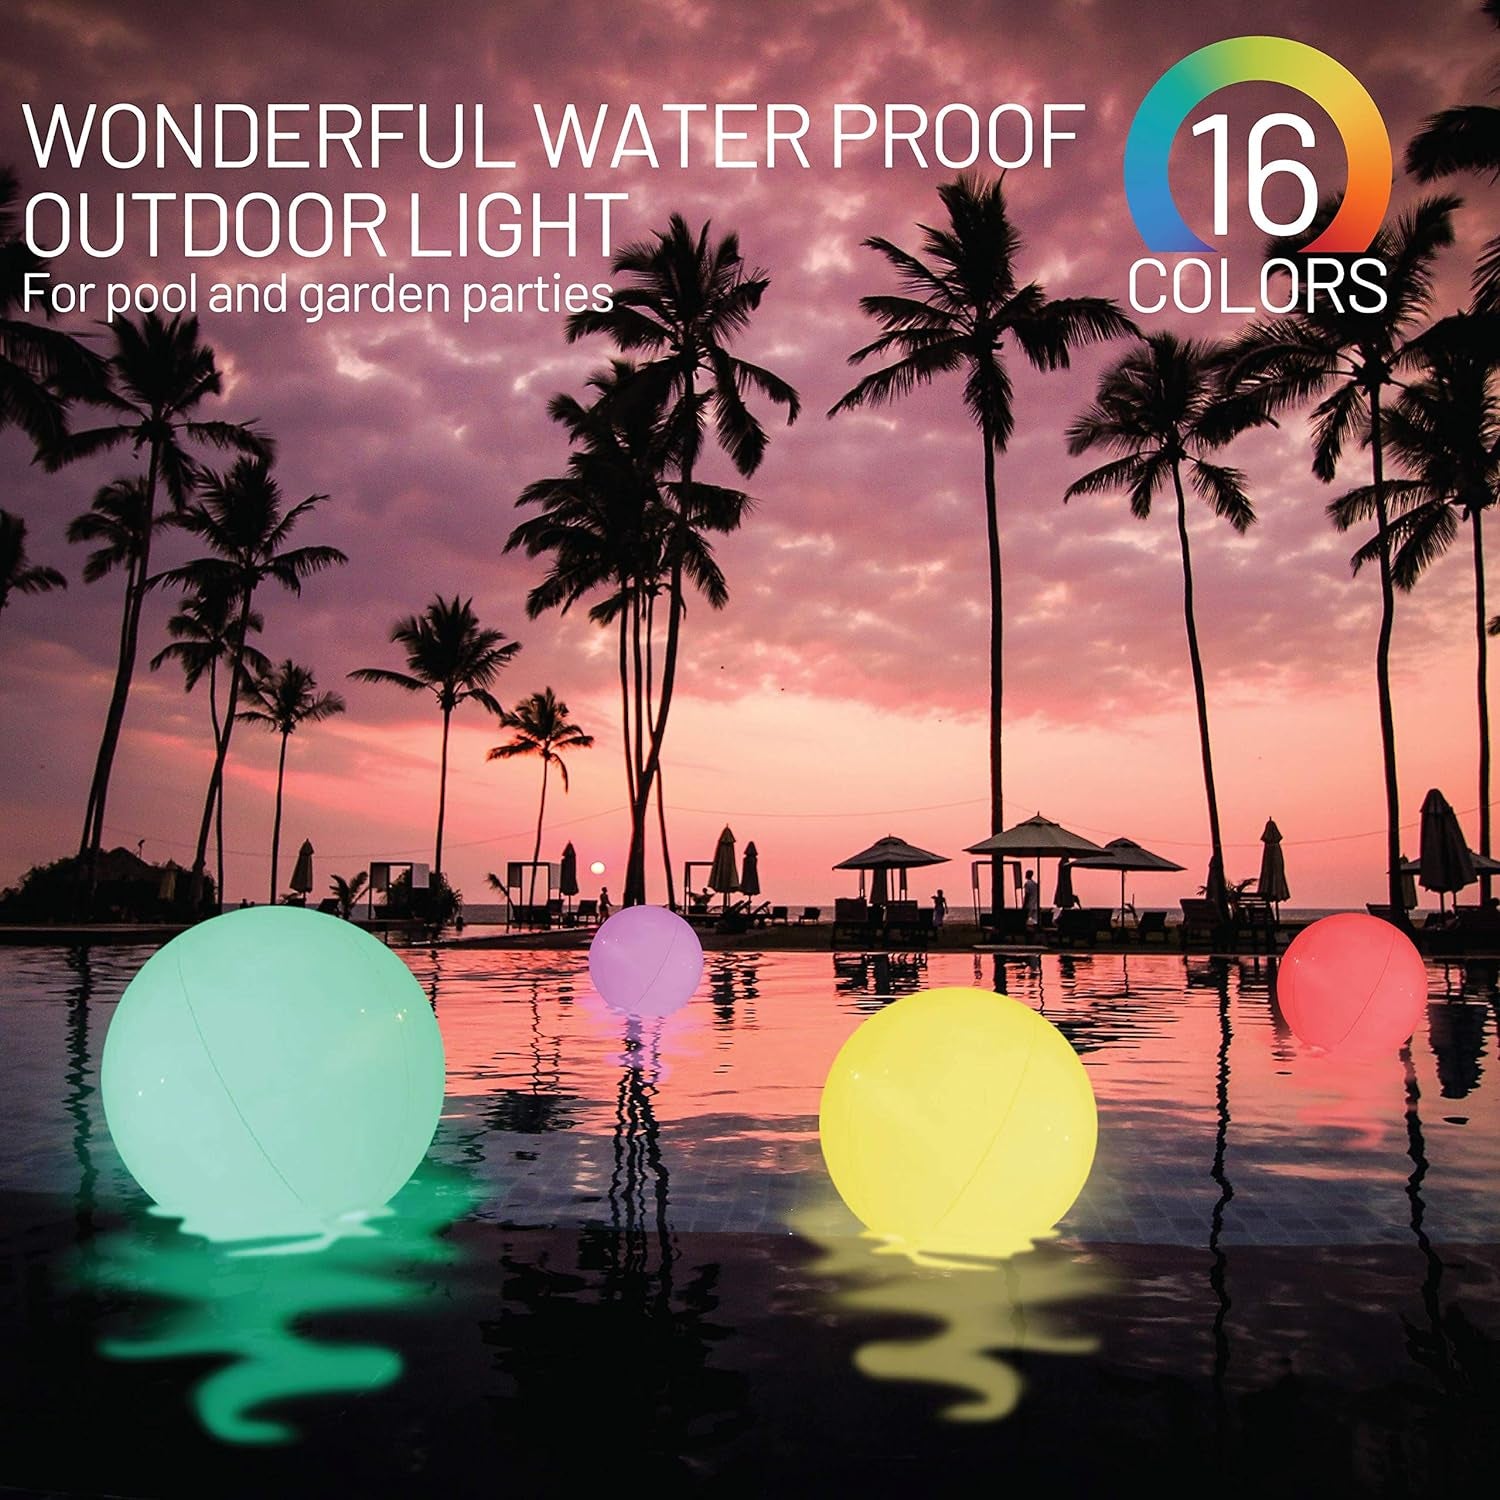 Pool Toys - LED Beach Ball with Remote Control - 16 Colors Lights and 4 Light Modes, 100Ft Control Distance - Outdoor Beach Party Games for Kids Adults, Pool Patio Garden Decorations (1PCS).